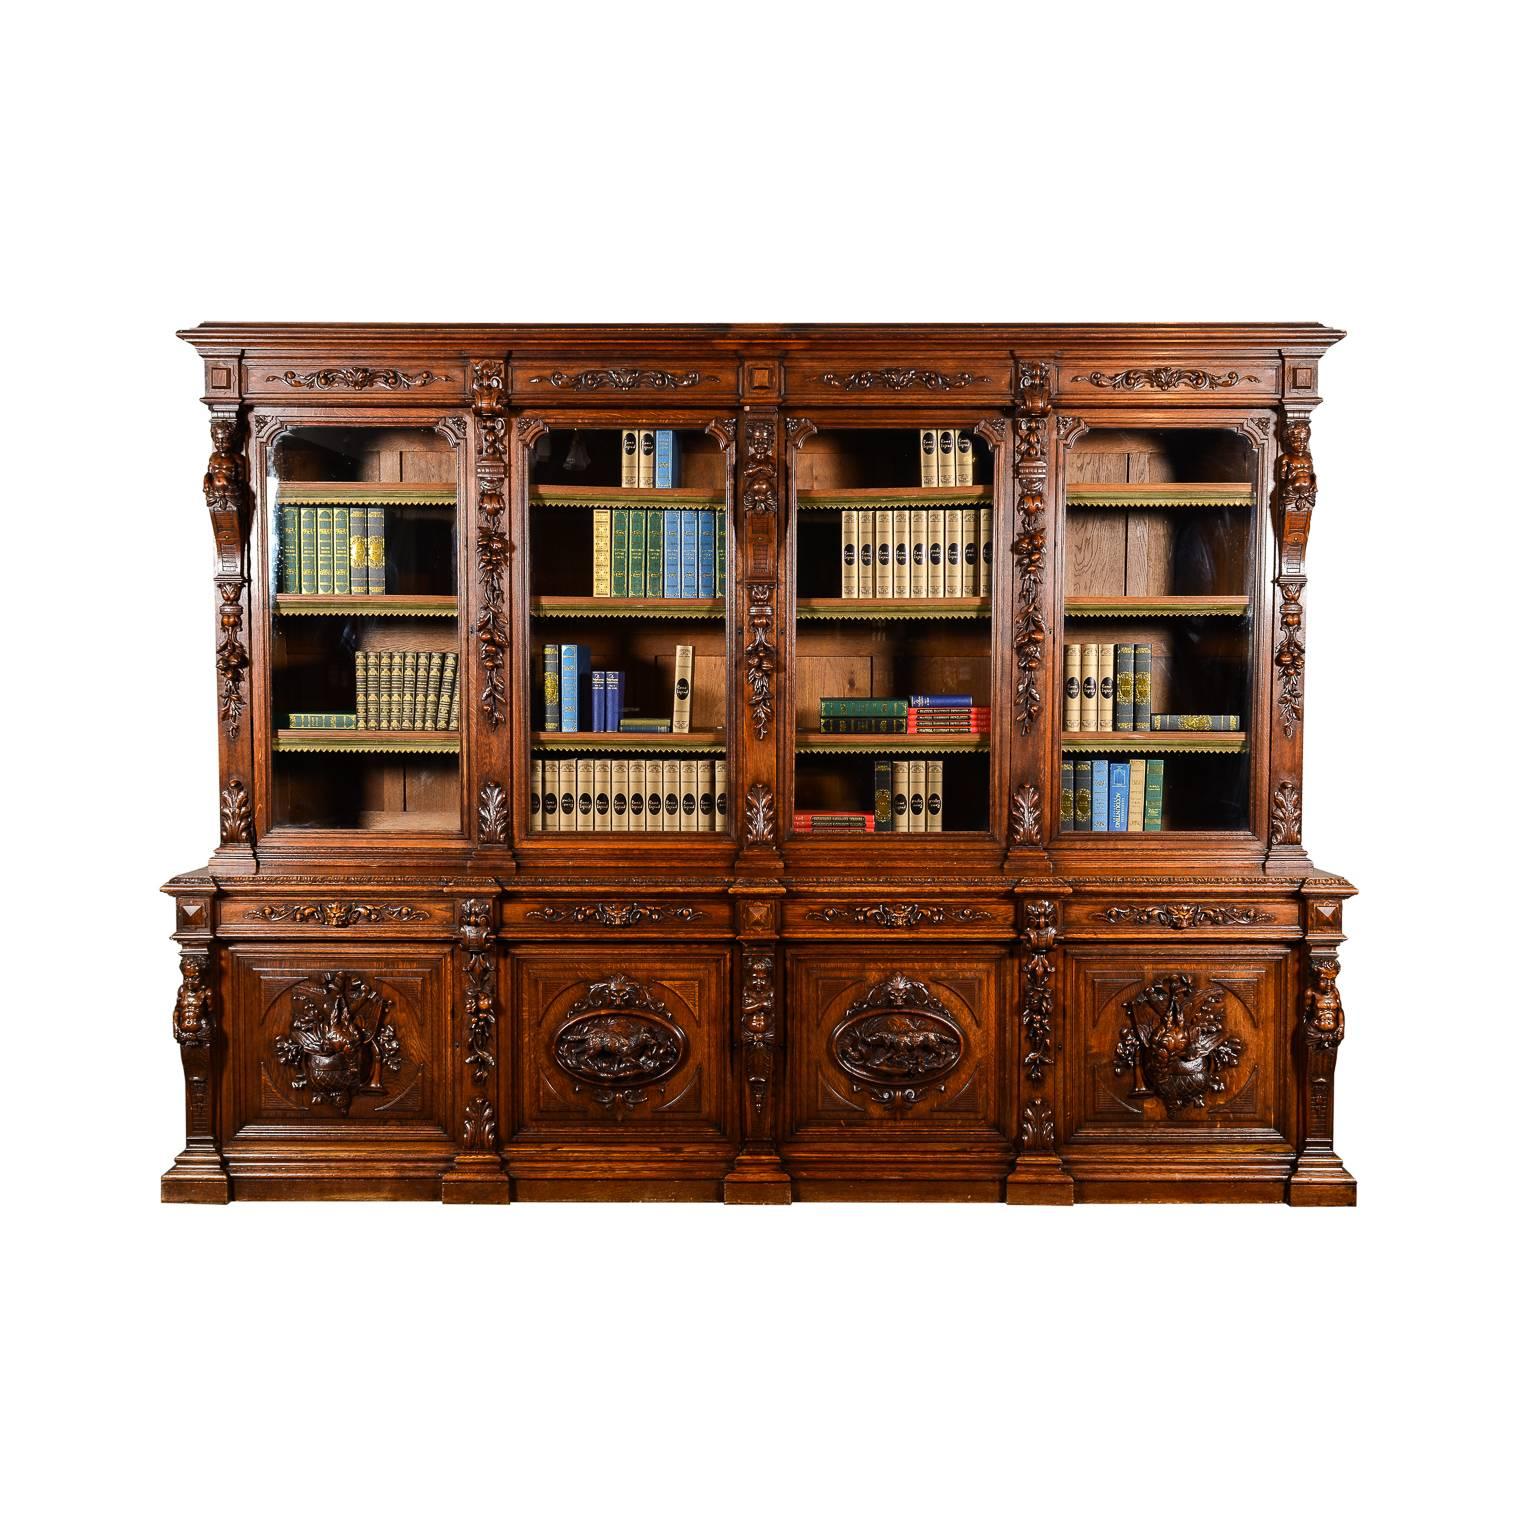 A monumental eight-door French ‘Hunters’ library bookcase in solid oak, with the lower doors featuring hand-carved panels of fox, hunting dog, and game-birds with hunting accessories. The upright pilasters are embellished with cherubs and swags of